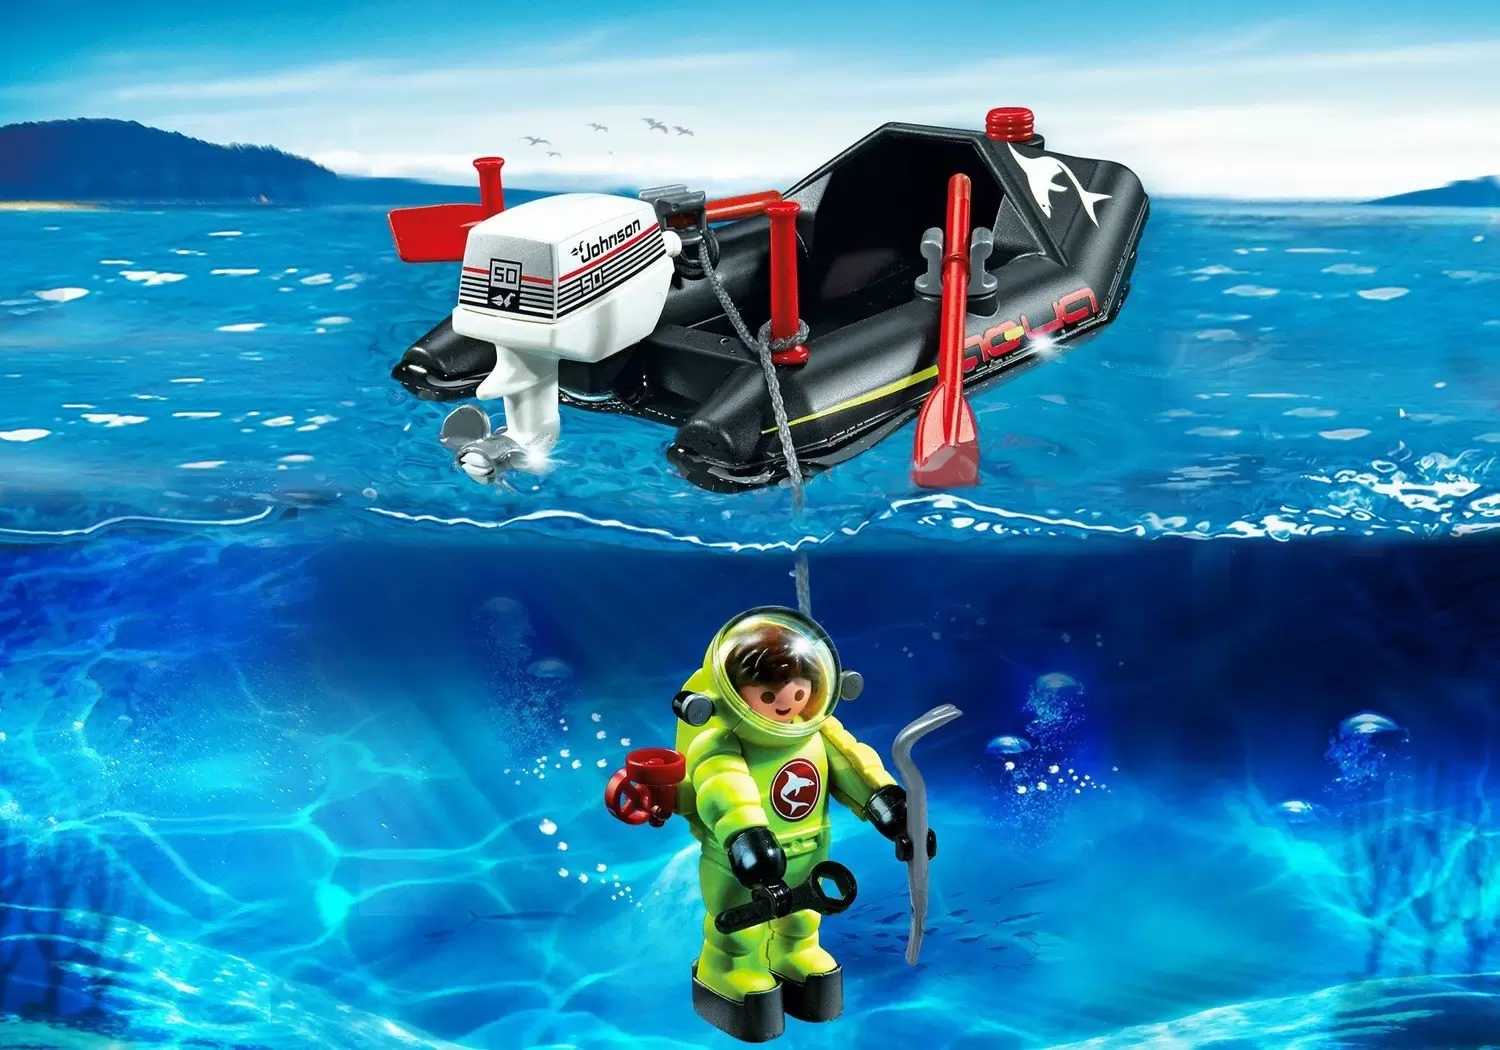 Playmobil Port & Harbour - Dinghy with Diver